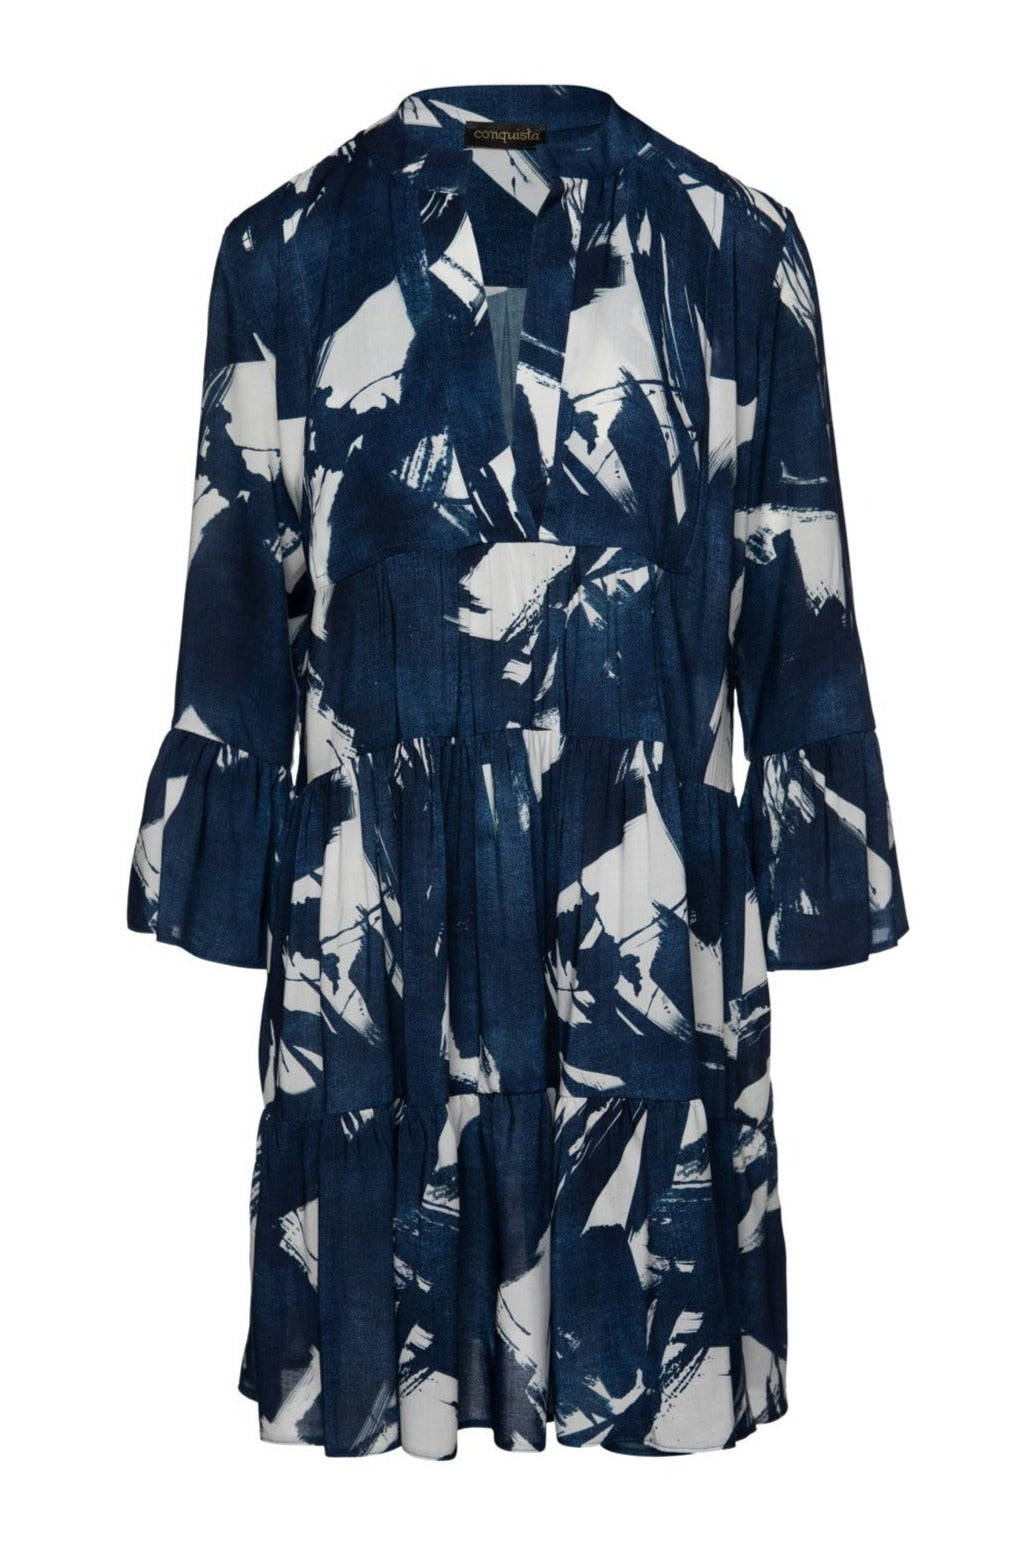 Navy and White A Line Dress with Bell Sleeves